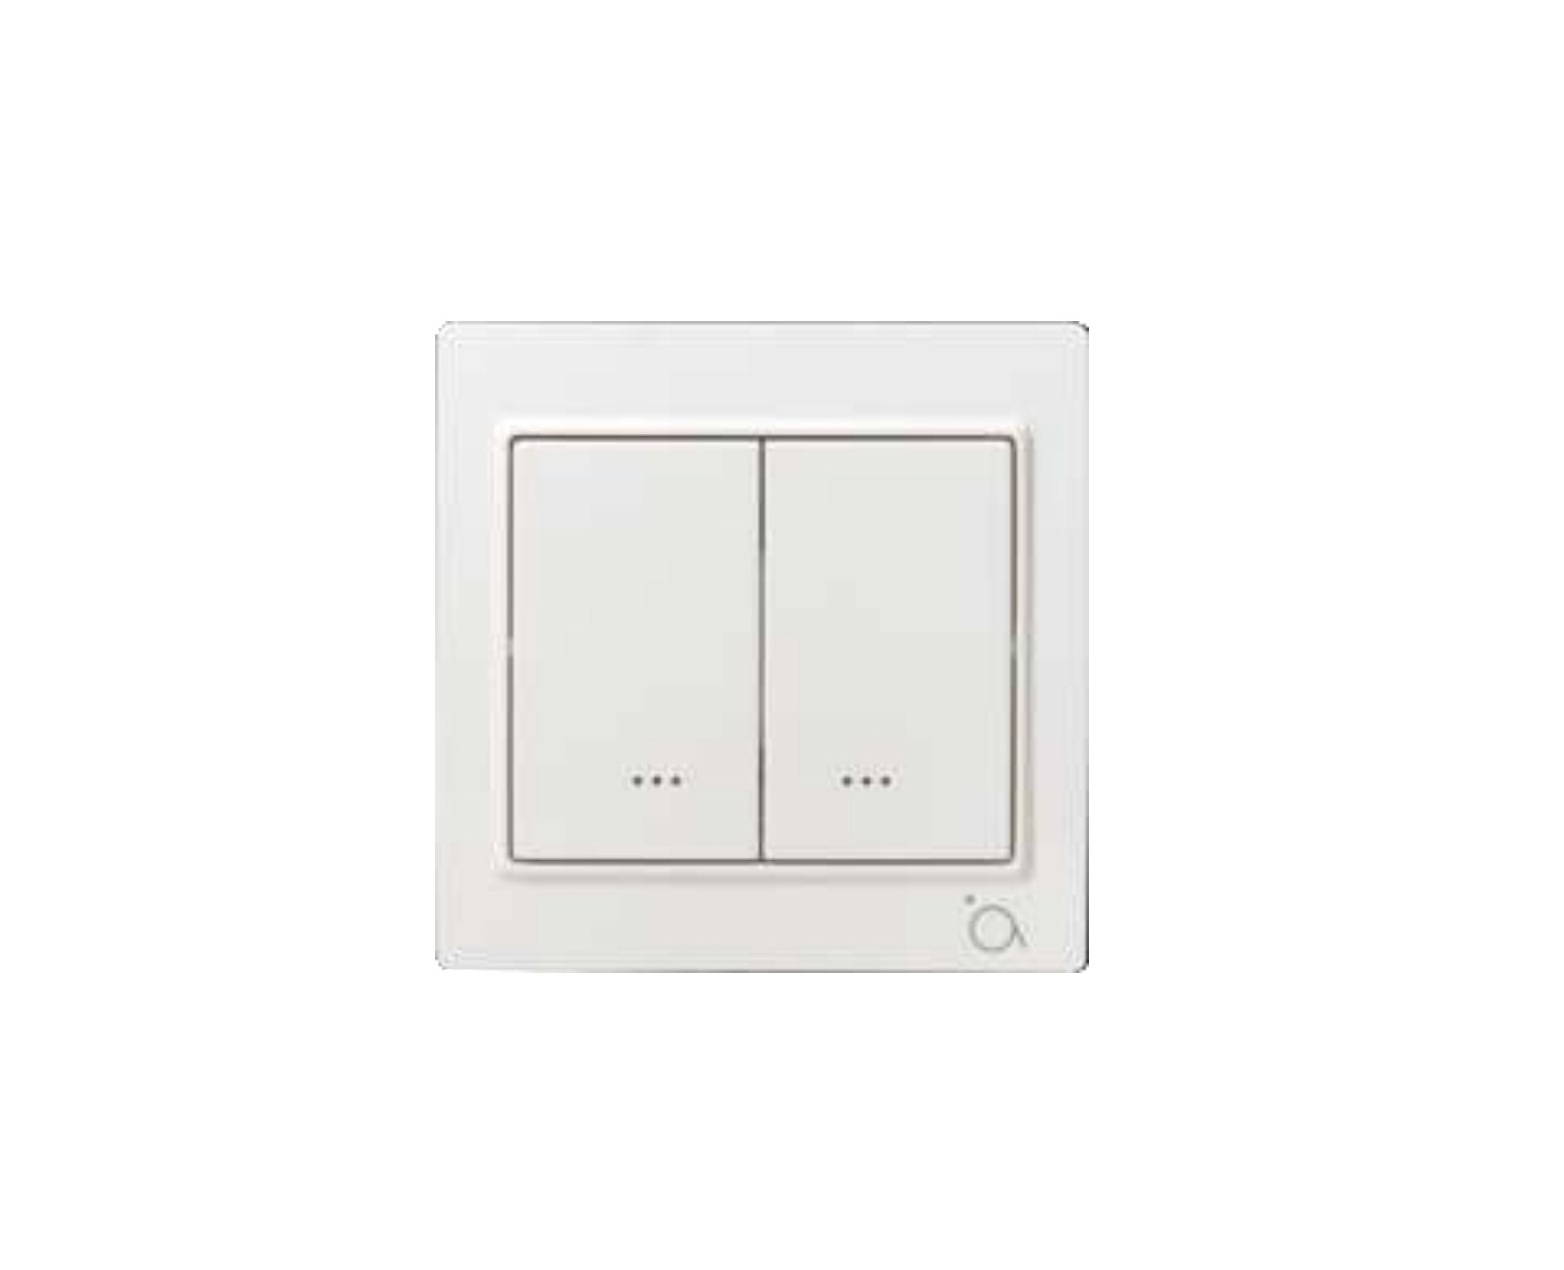 Air Live Dual Relay Wall Switch User Manual